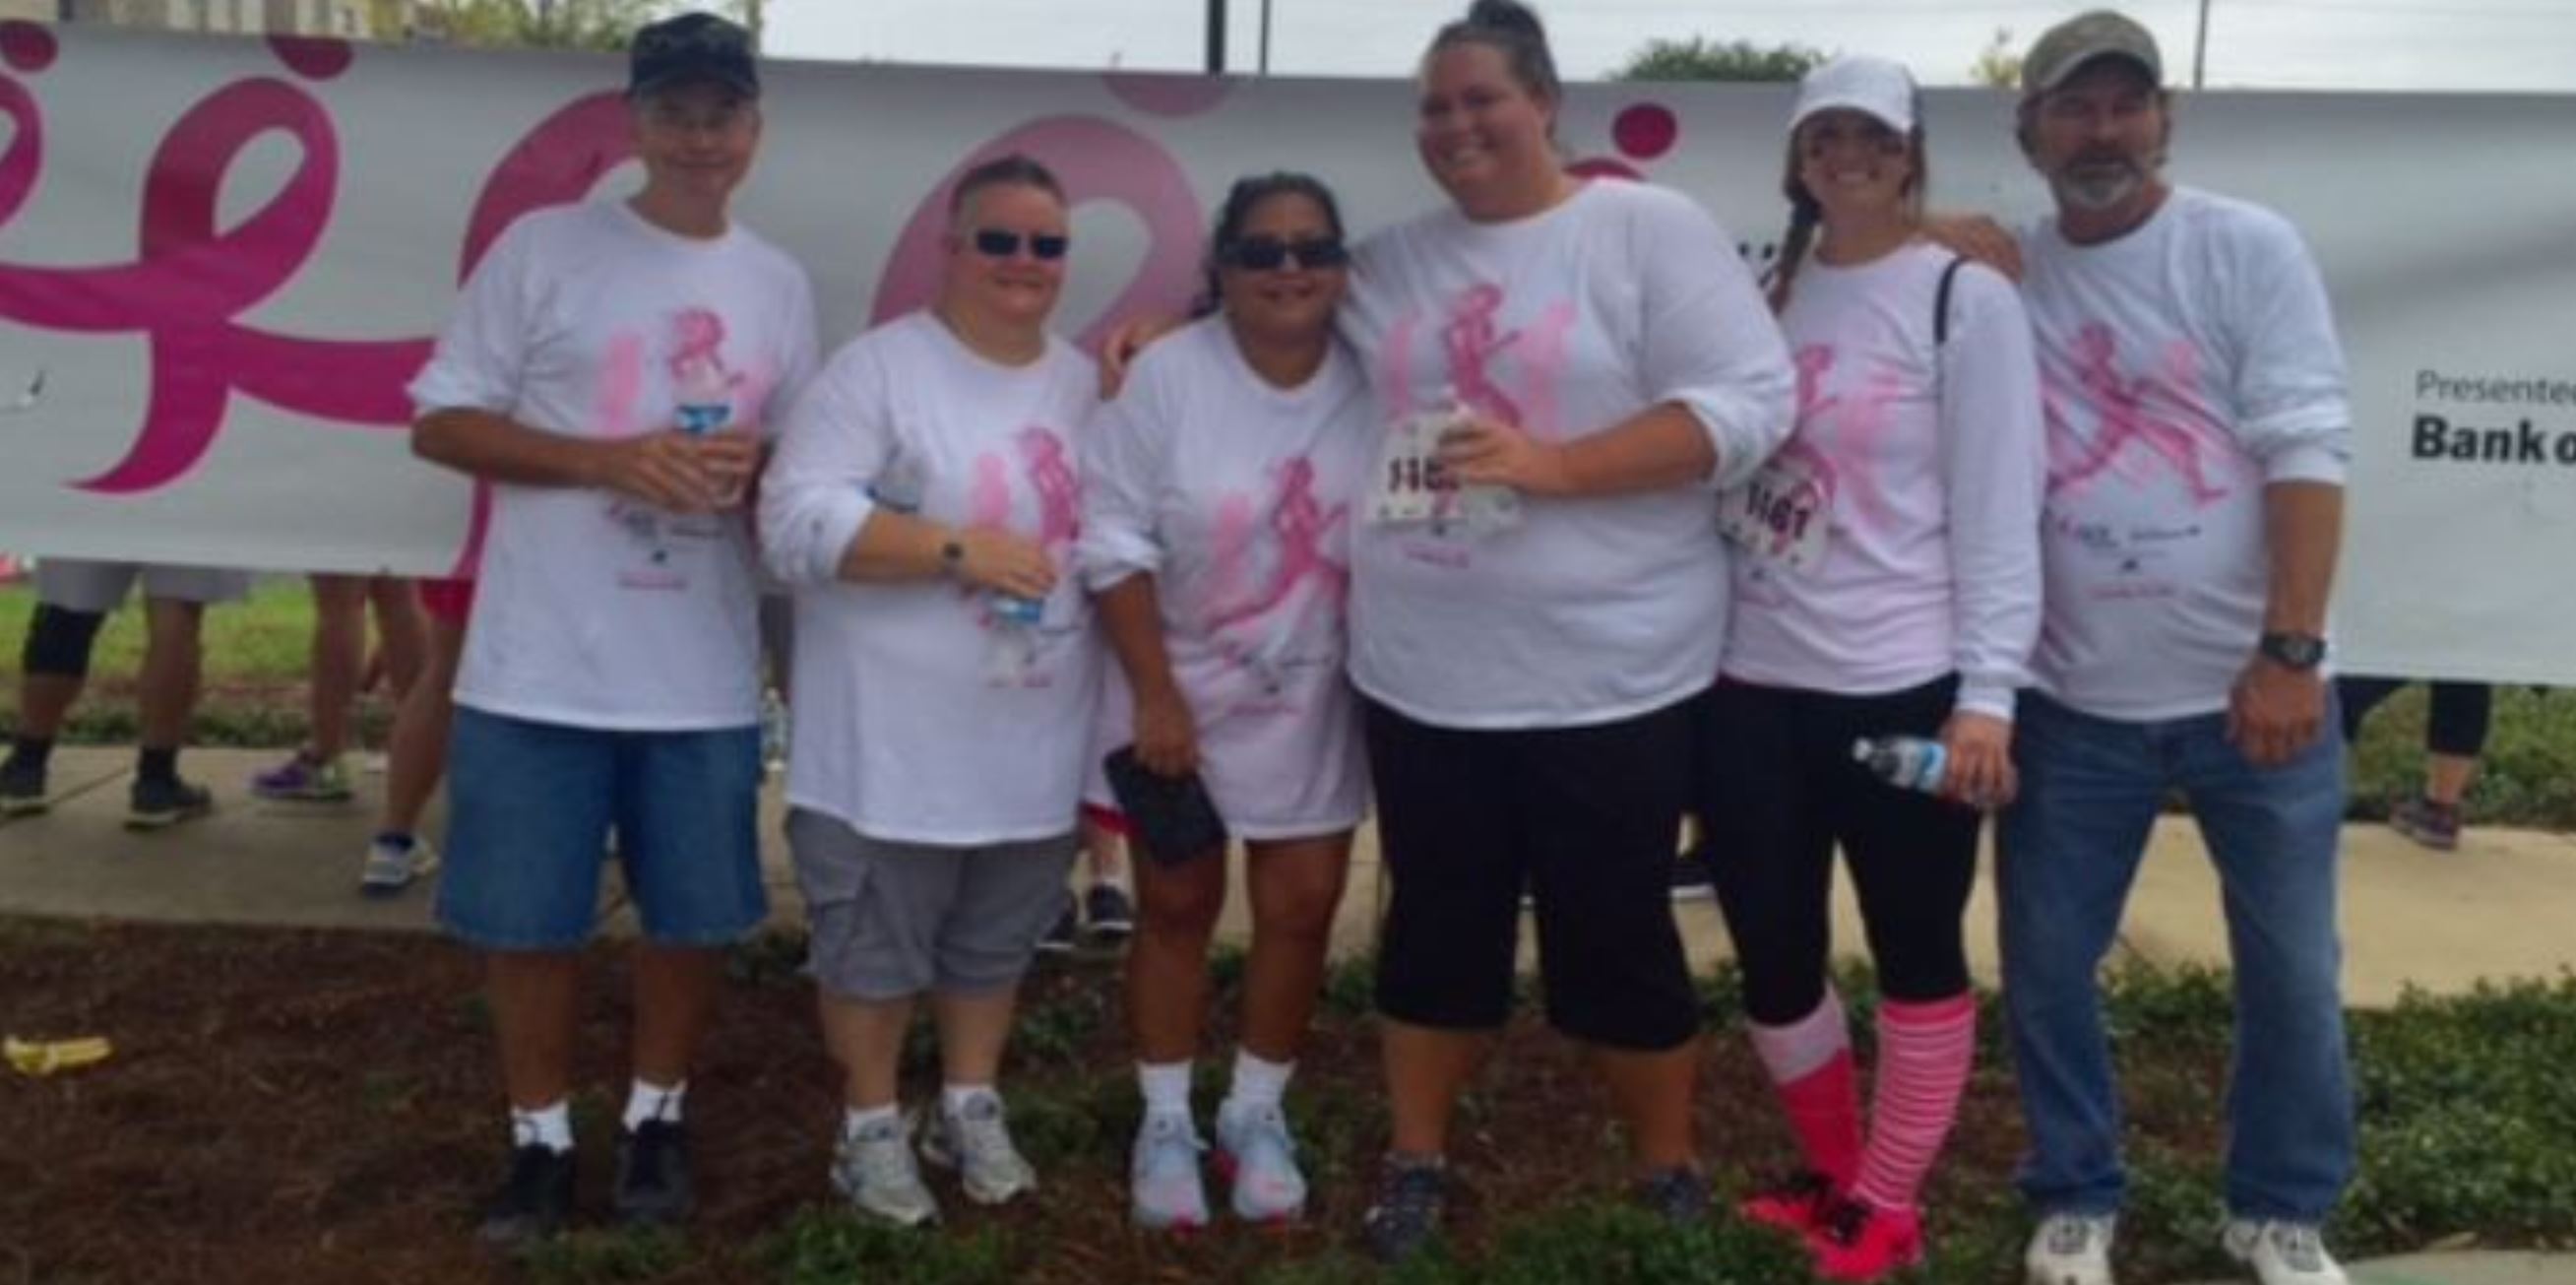 Macon Race for the Cure 2015